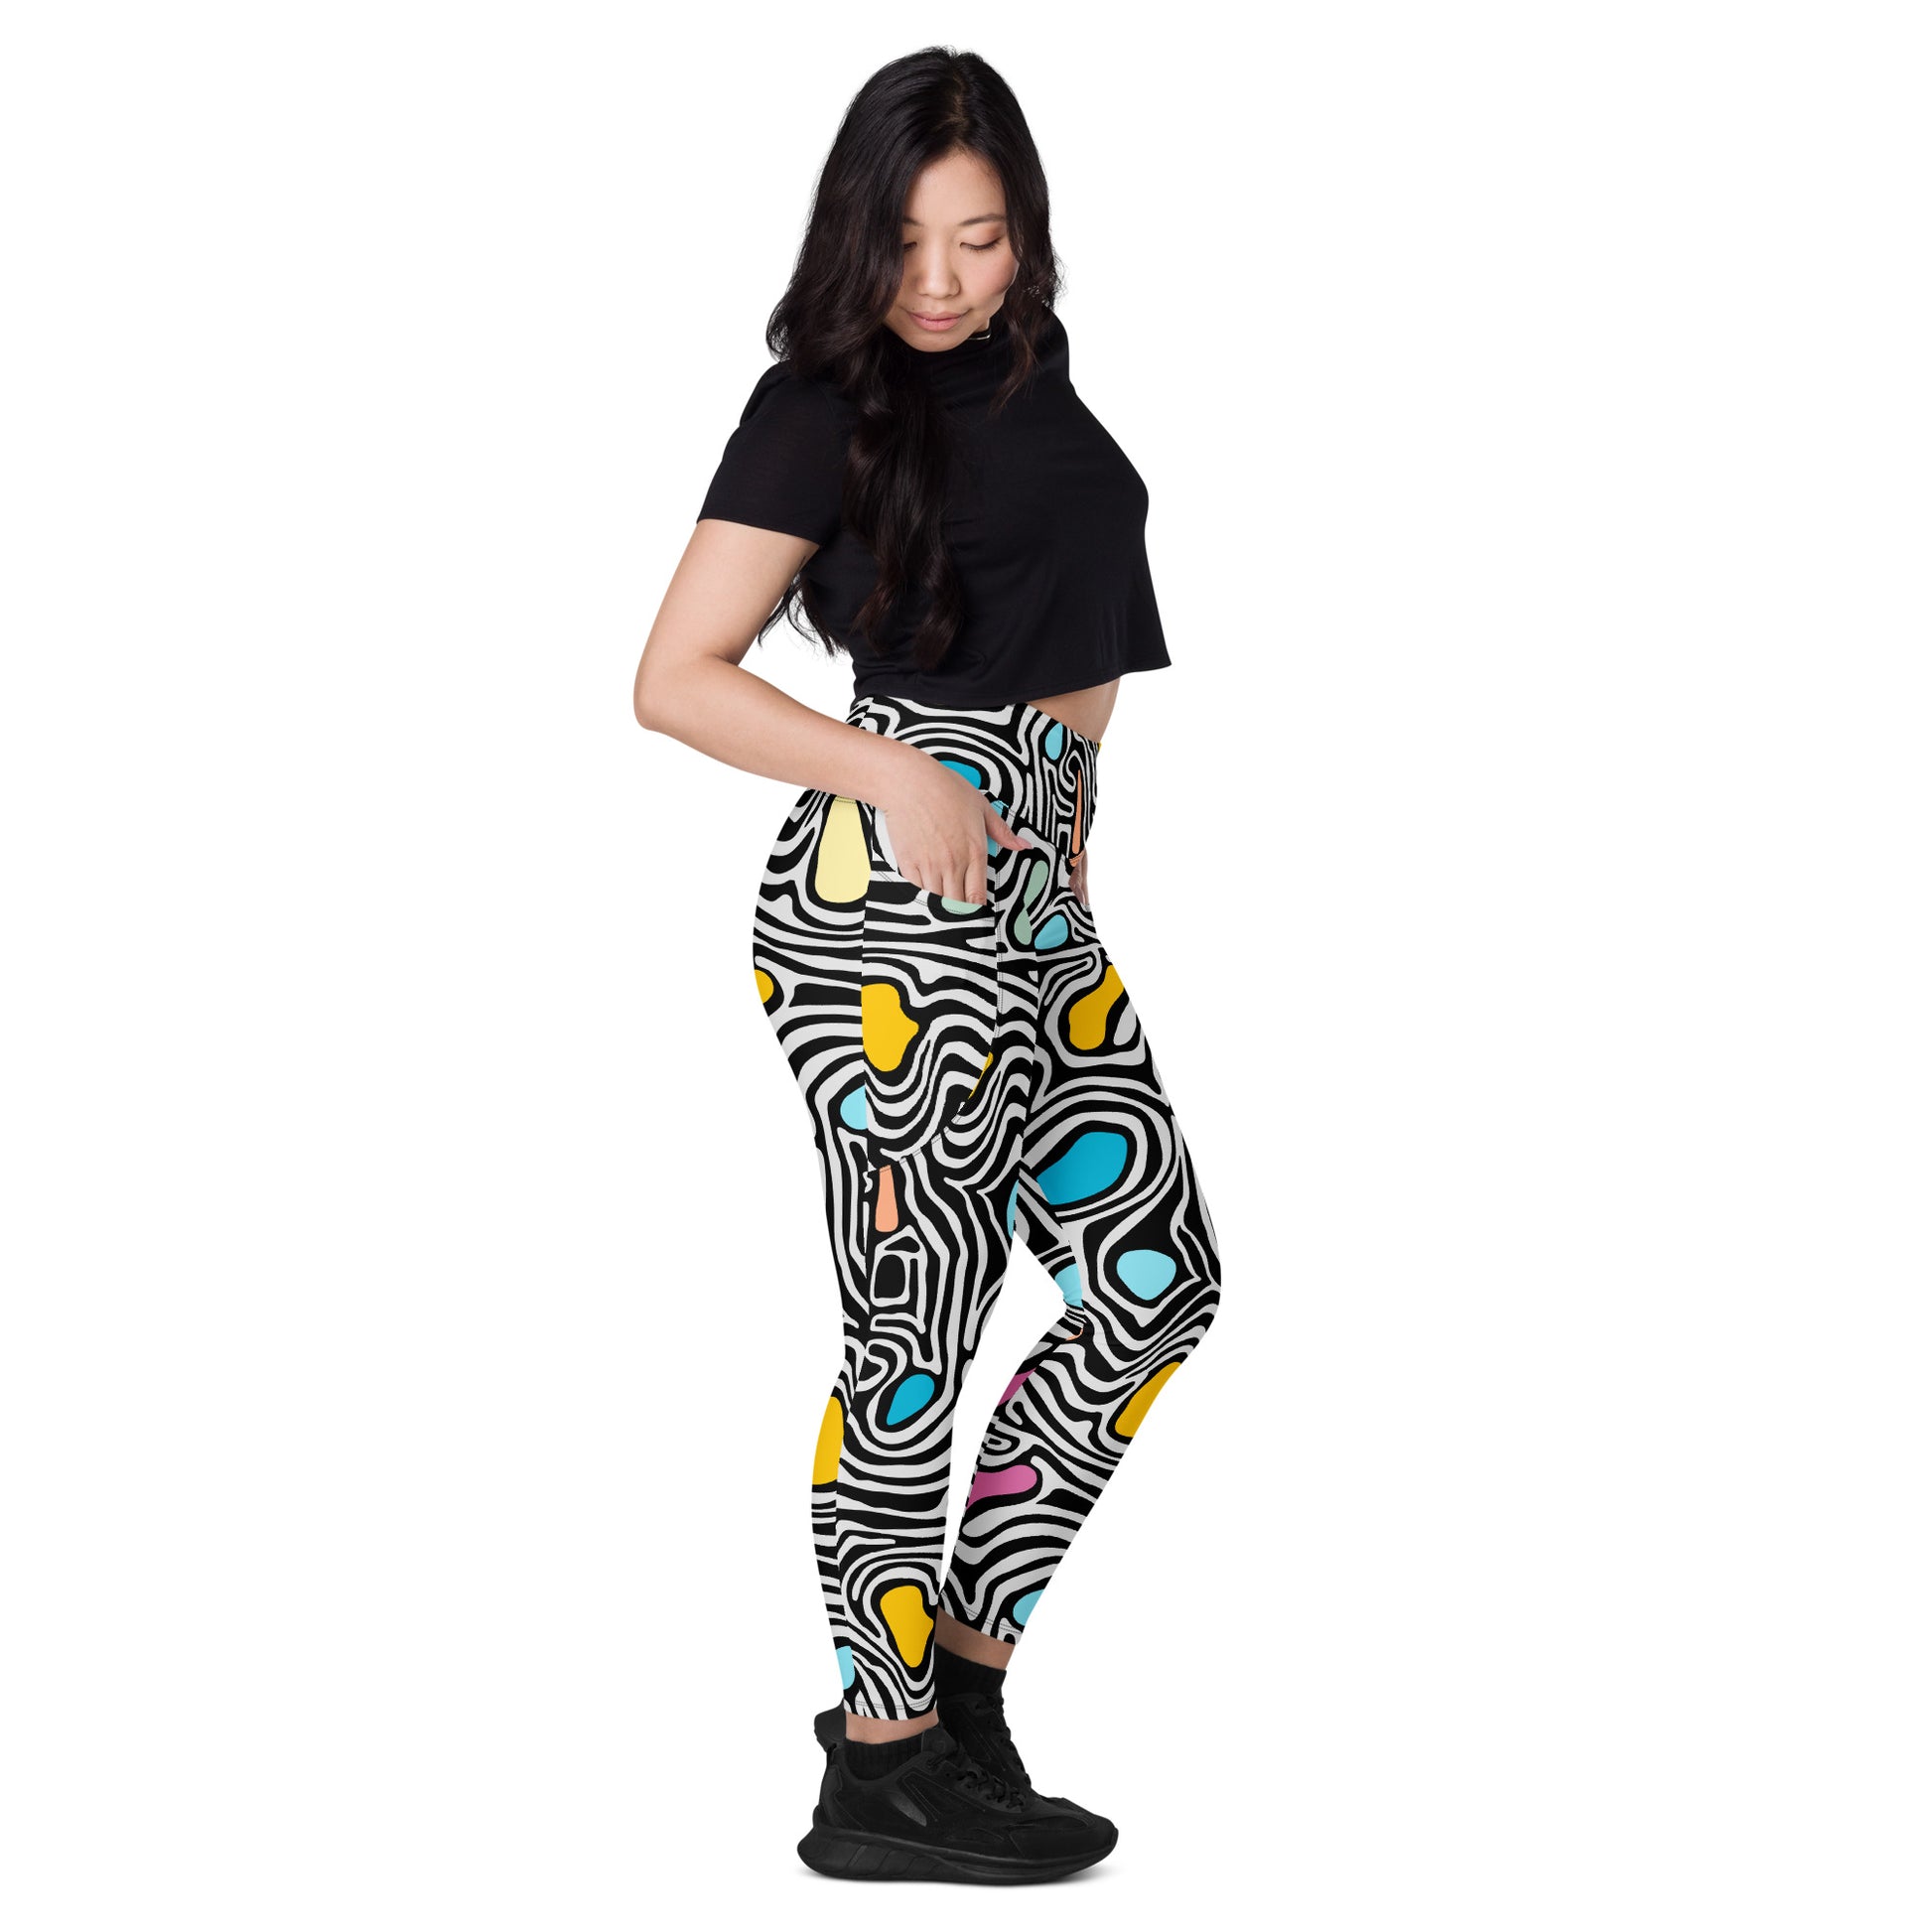 Trippy - Leggings with pockets, 2XS - 6XL Leggings With Pockets 2XS - 6XL (US)